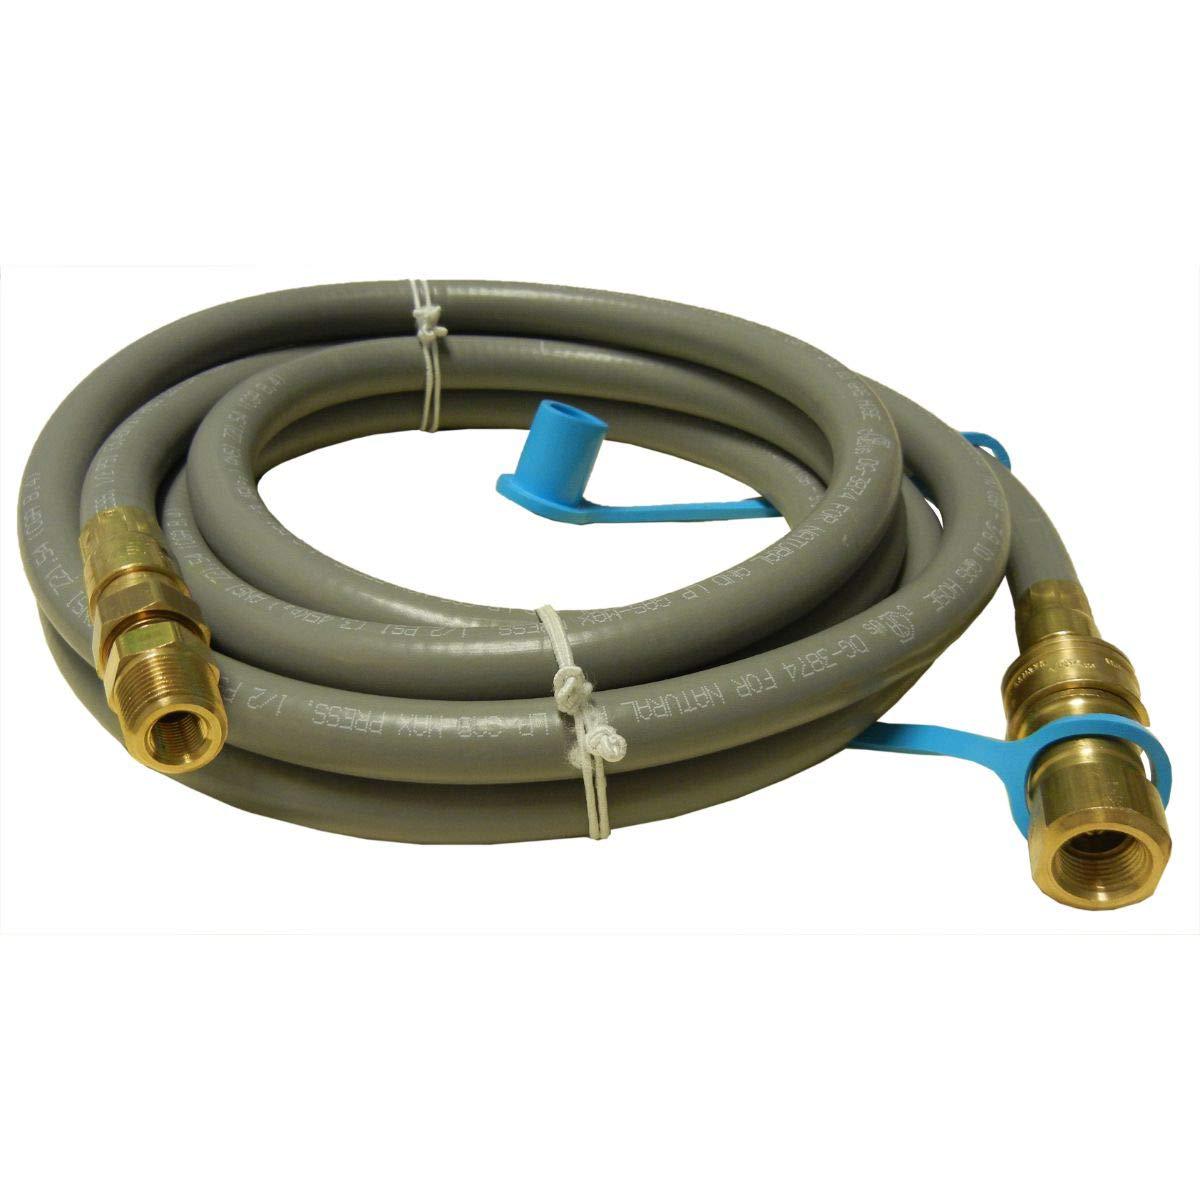 Contemporary Home Living 10' black natural gas hose with quick connect coupling